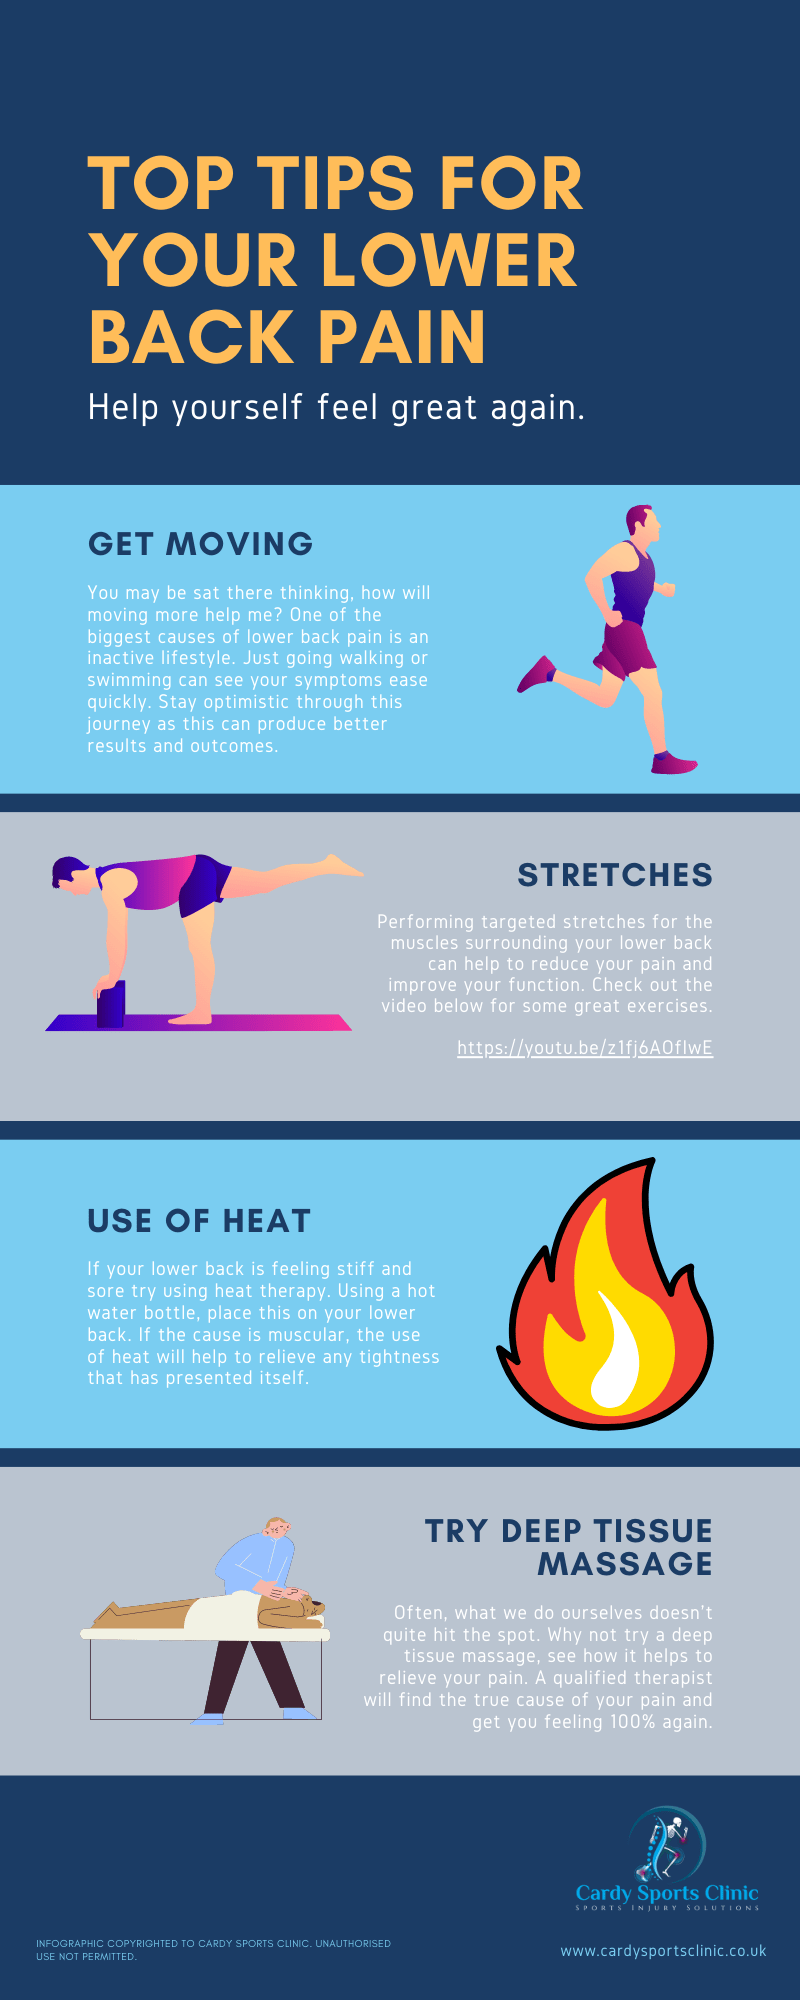 https://www.cardysportsclinic.co.uk/wp-content/uploads/2021/08/Top-Tips-for-Your-Lower-Back-Pain.png